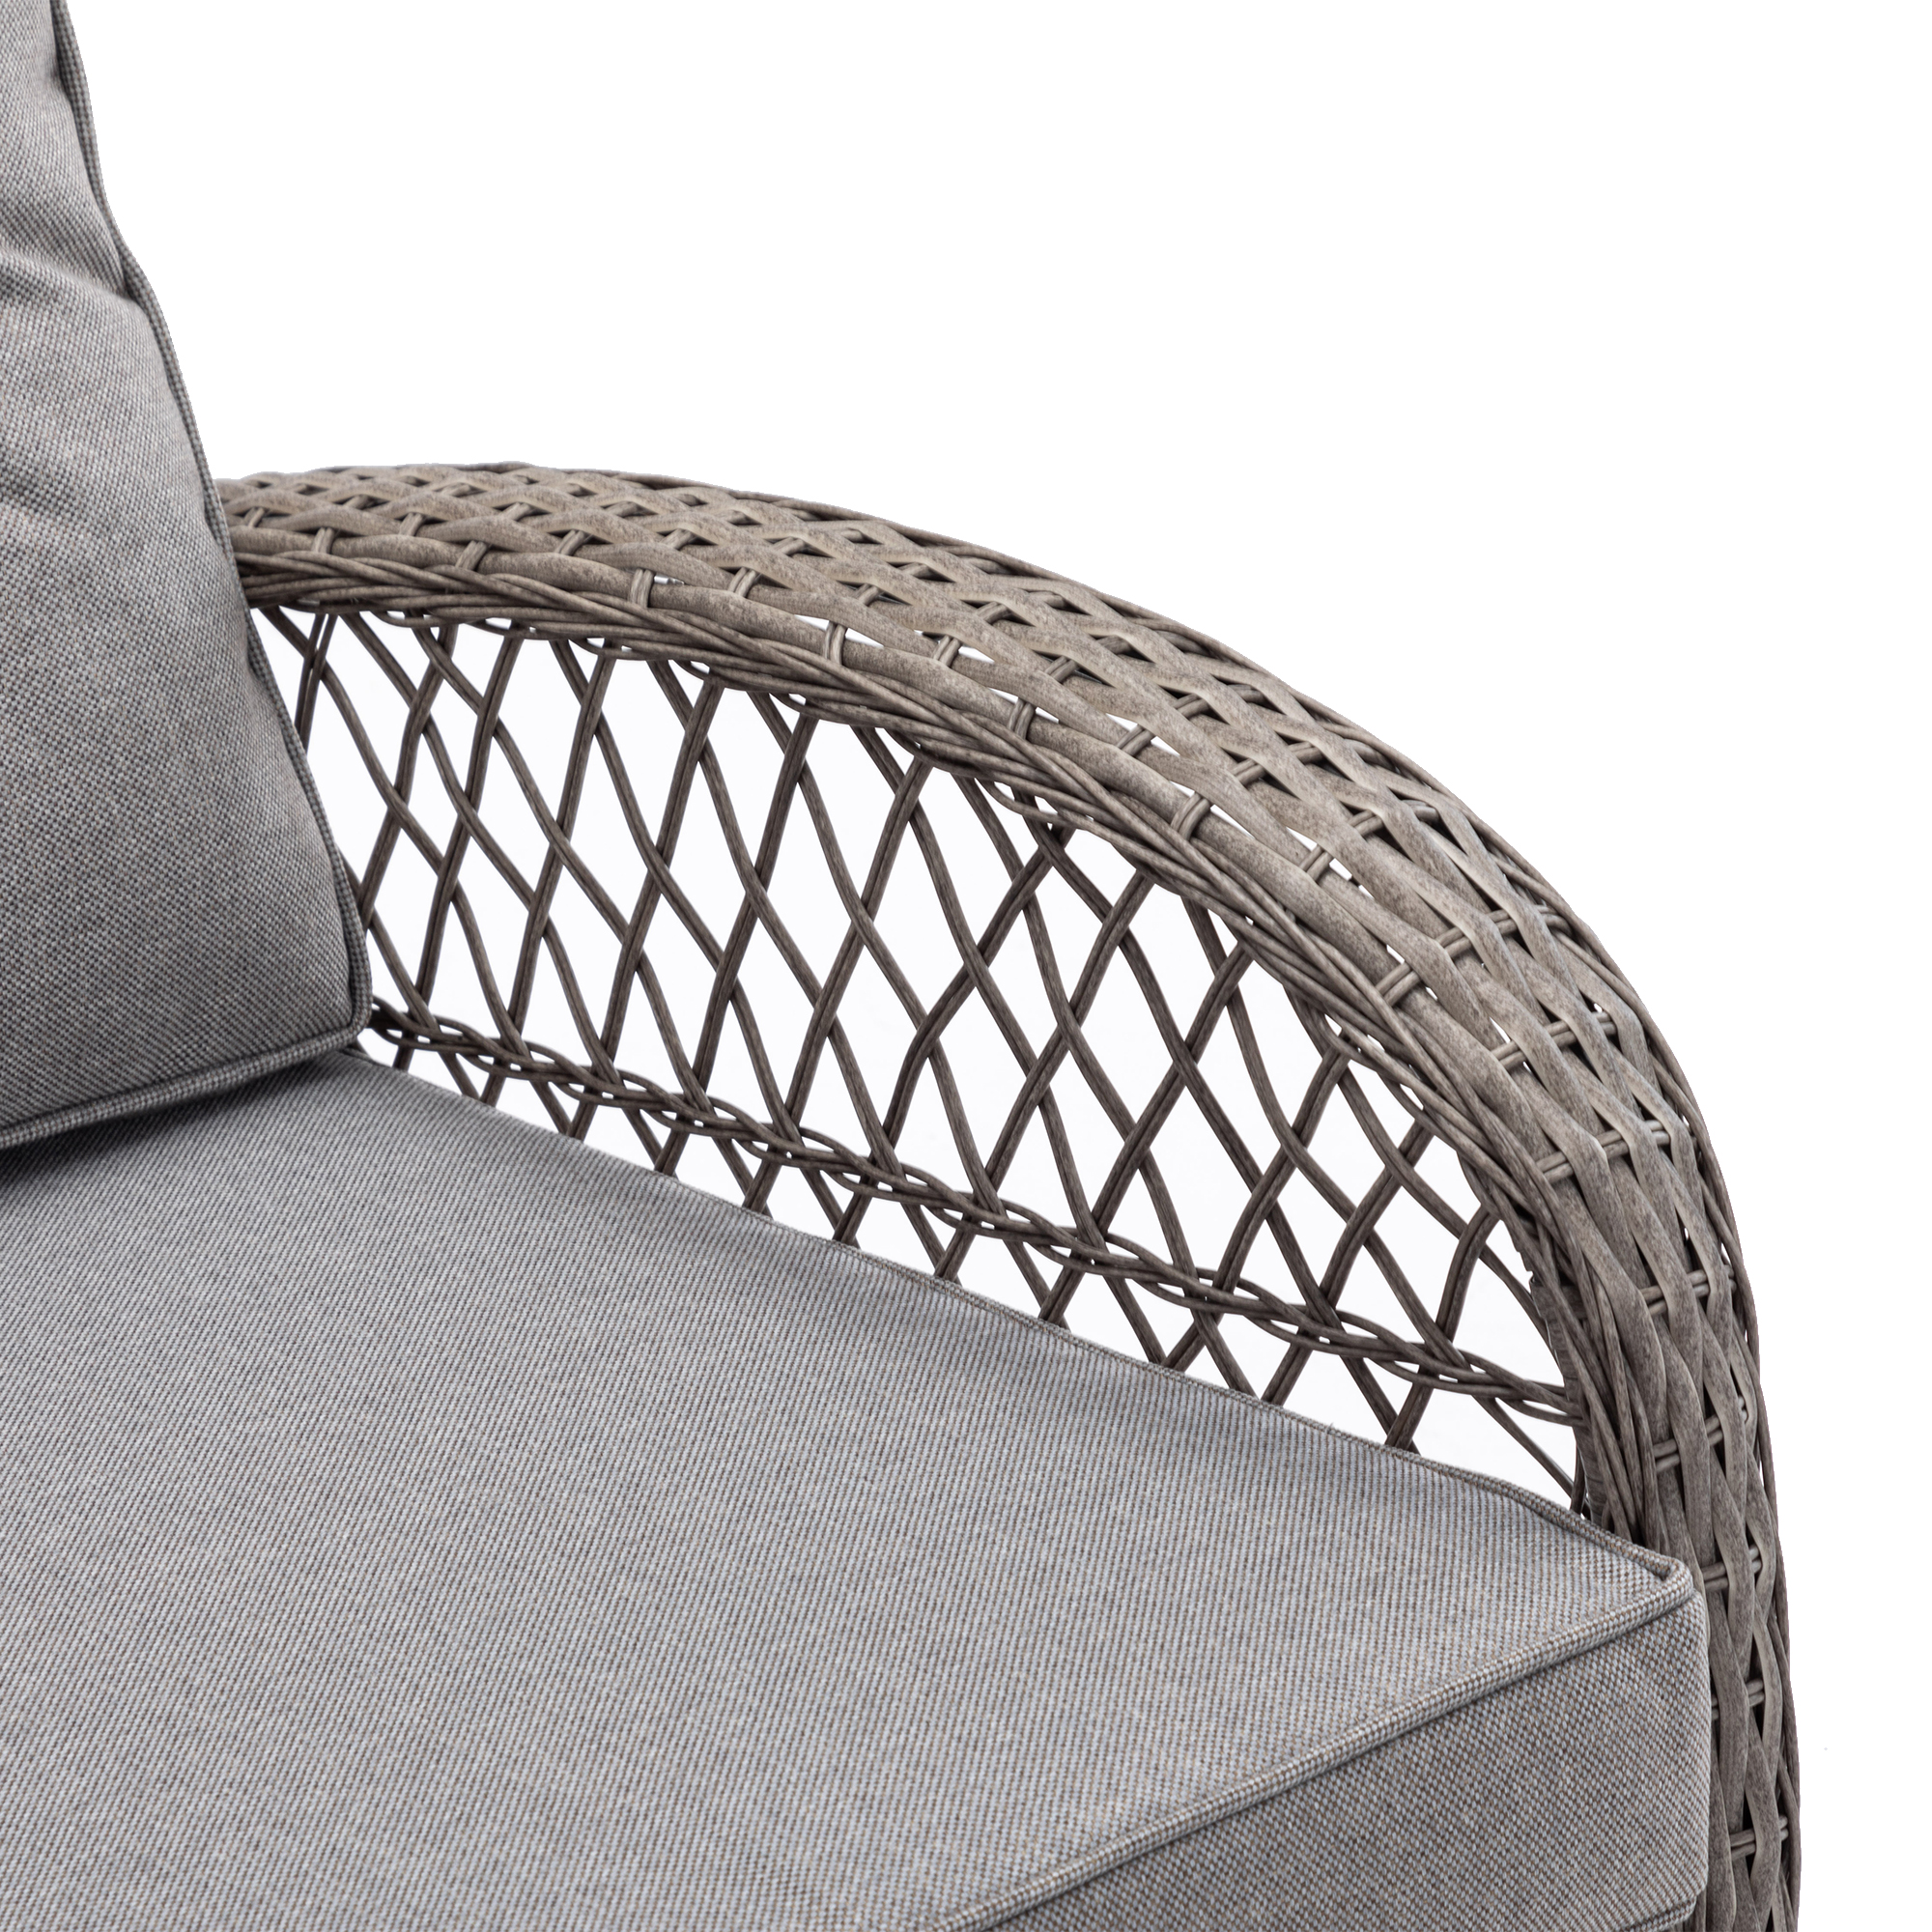 Royard Oaktree 3-Piece Patio Rocking Chair Outdoor Rattan Bistro Furniture Conversation Set with 2 Wicker Armchair and Glass Table for Porch Lawn Garden Backyard,Grey - image 3 of 7